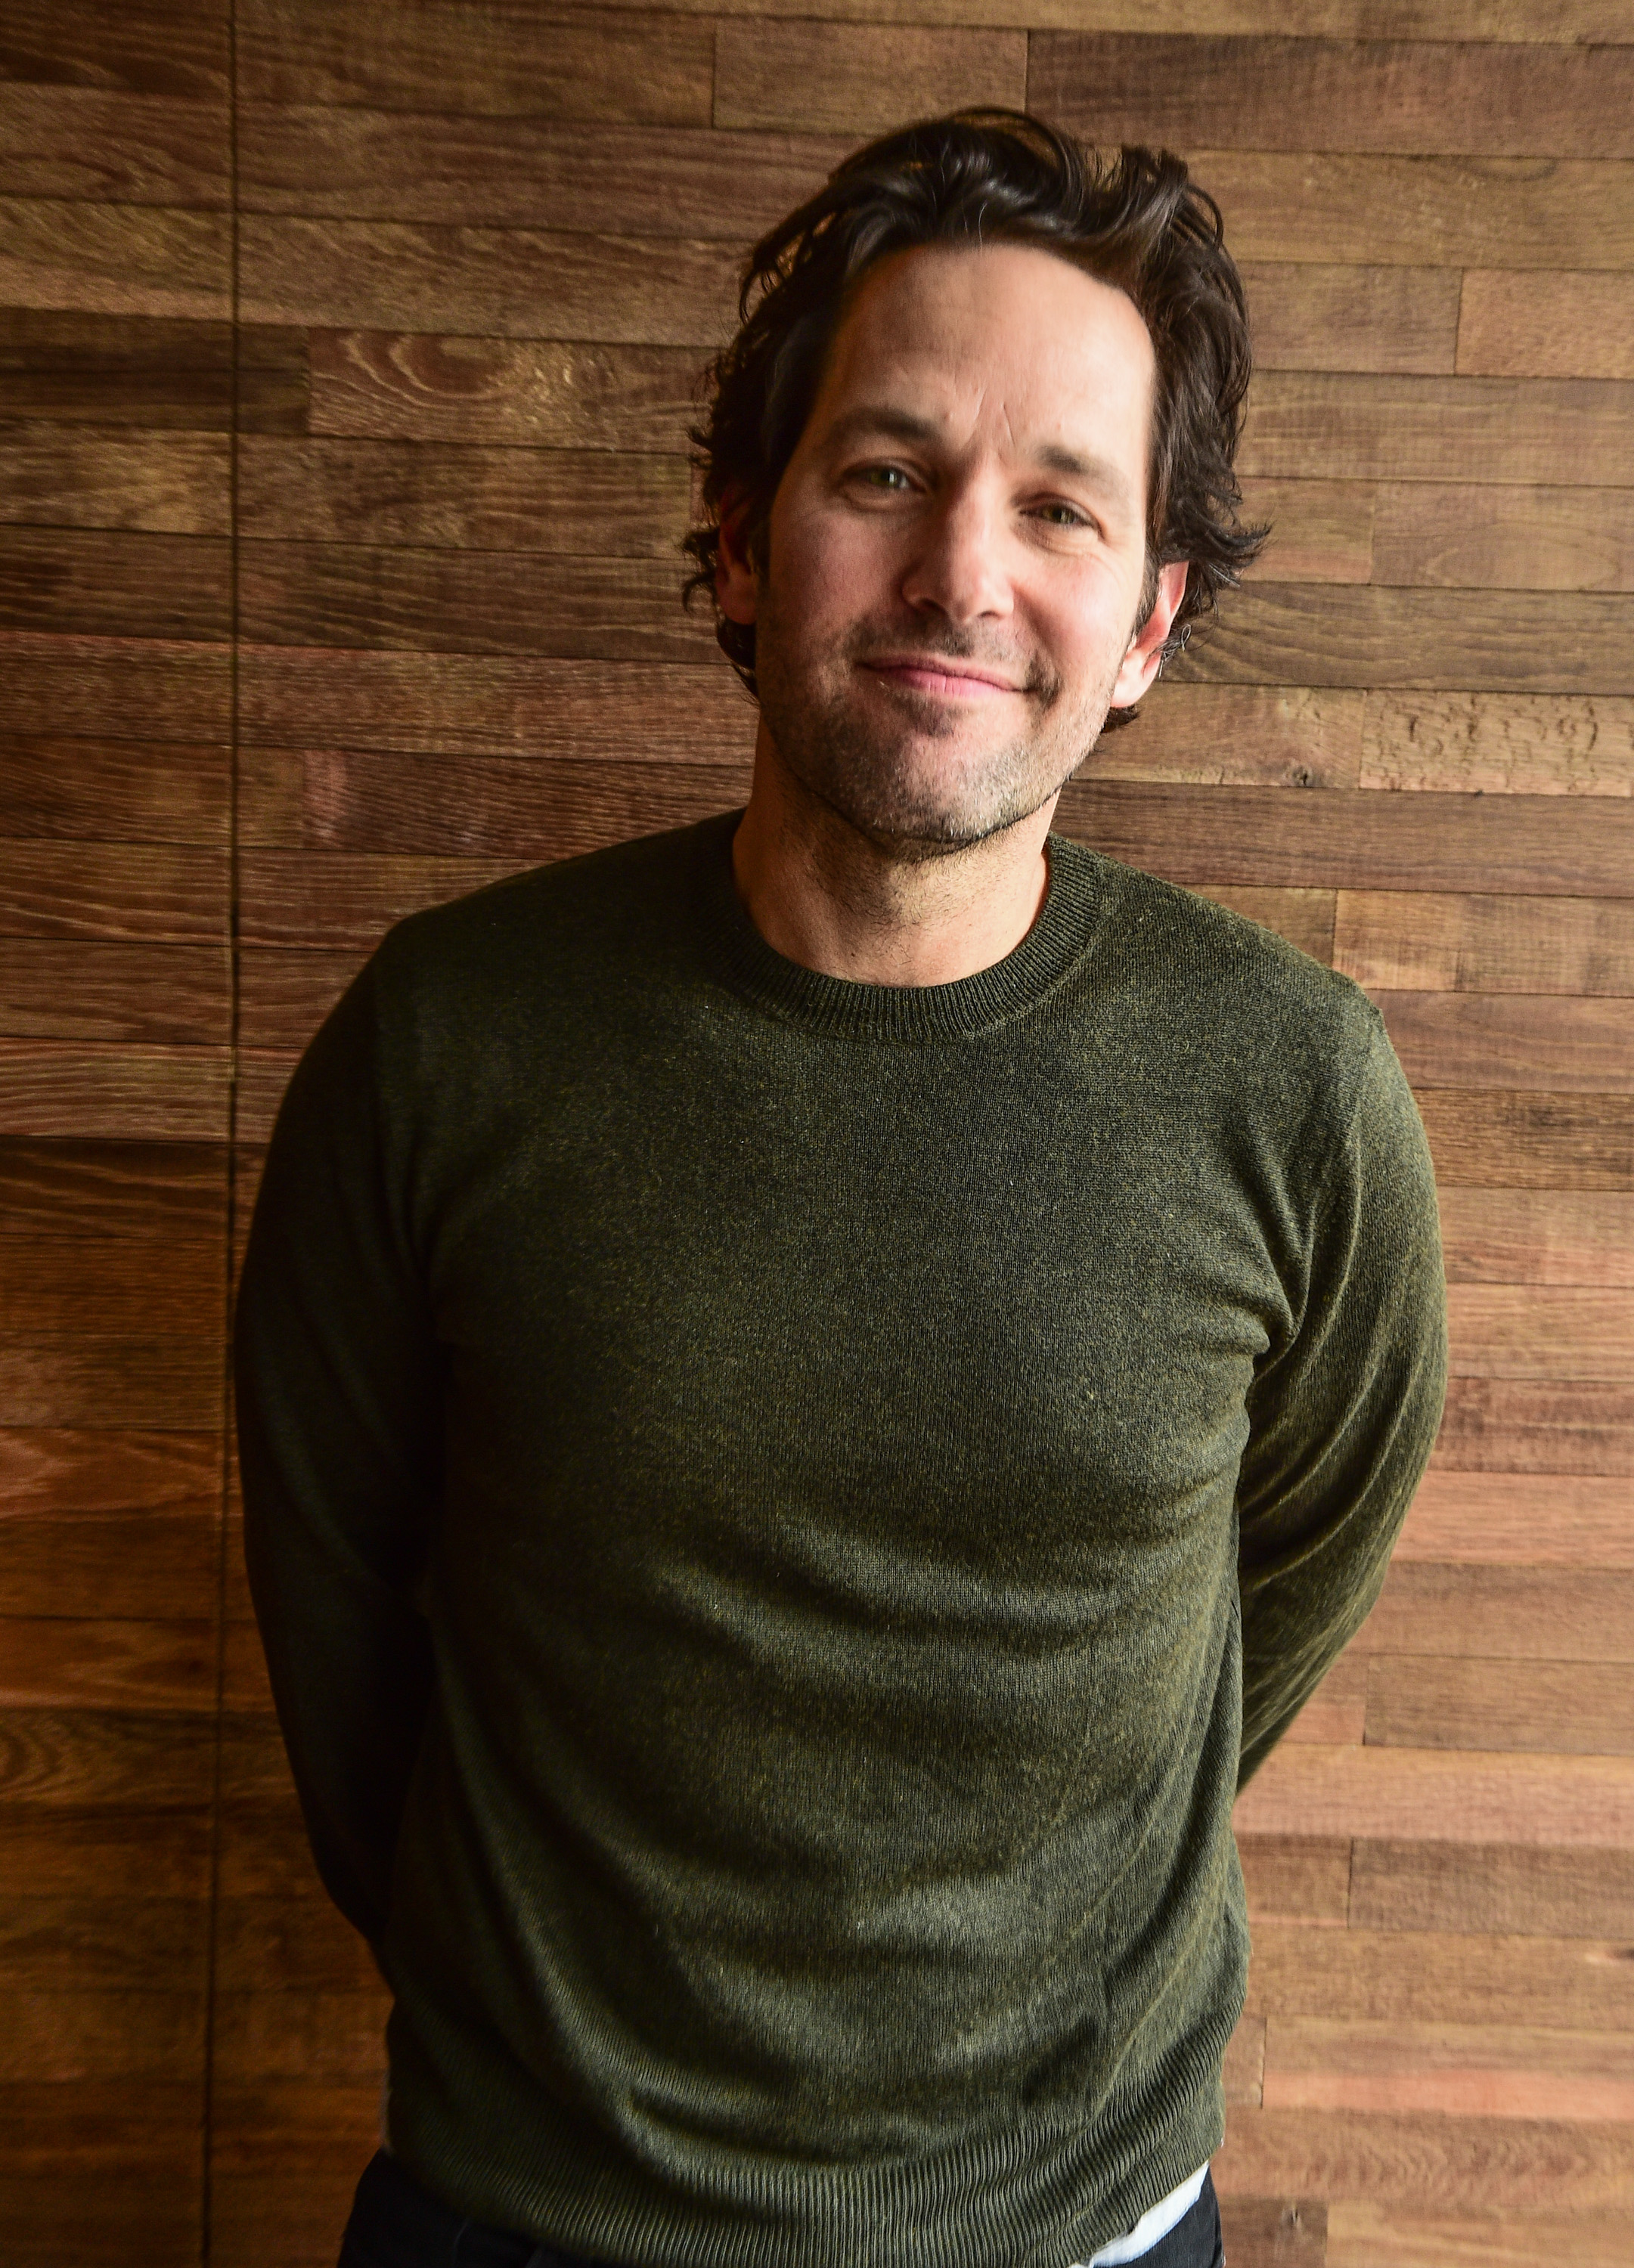 Paul Rudd attending "The Fundamentals of Caring" Portraits during the 2016 Sundance Film Festival at Acura Studio on January 29, 2016 in Park City, Utah | Source: Getty Images